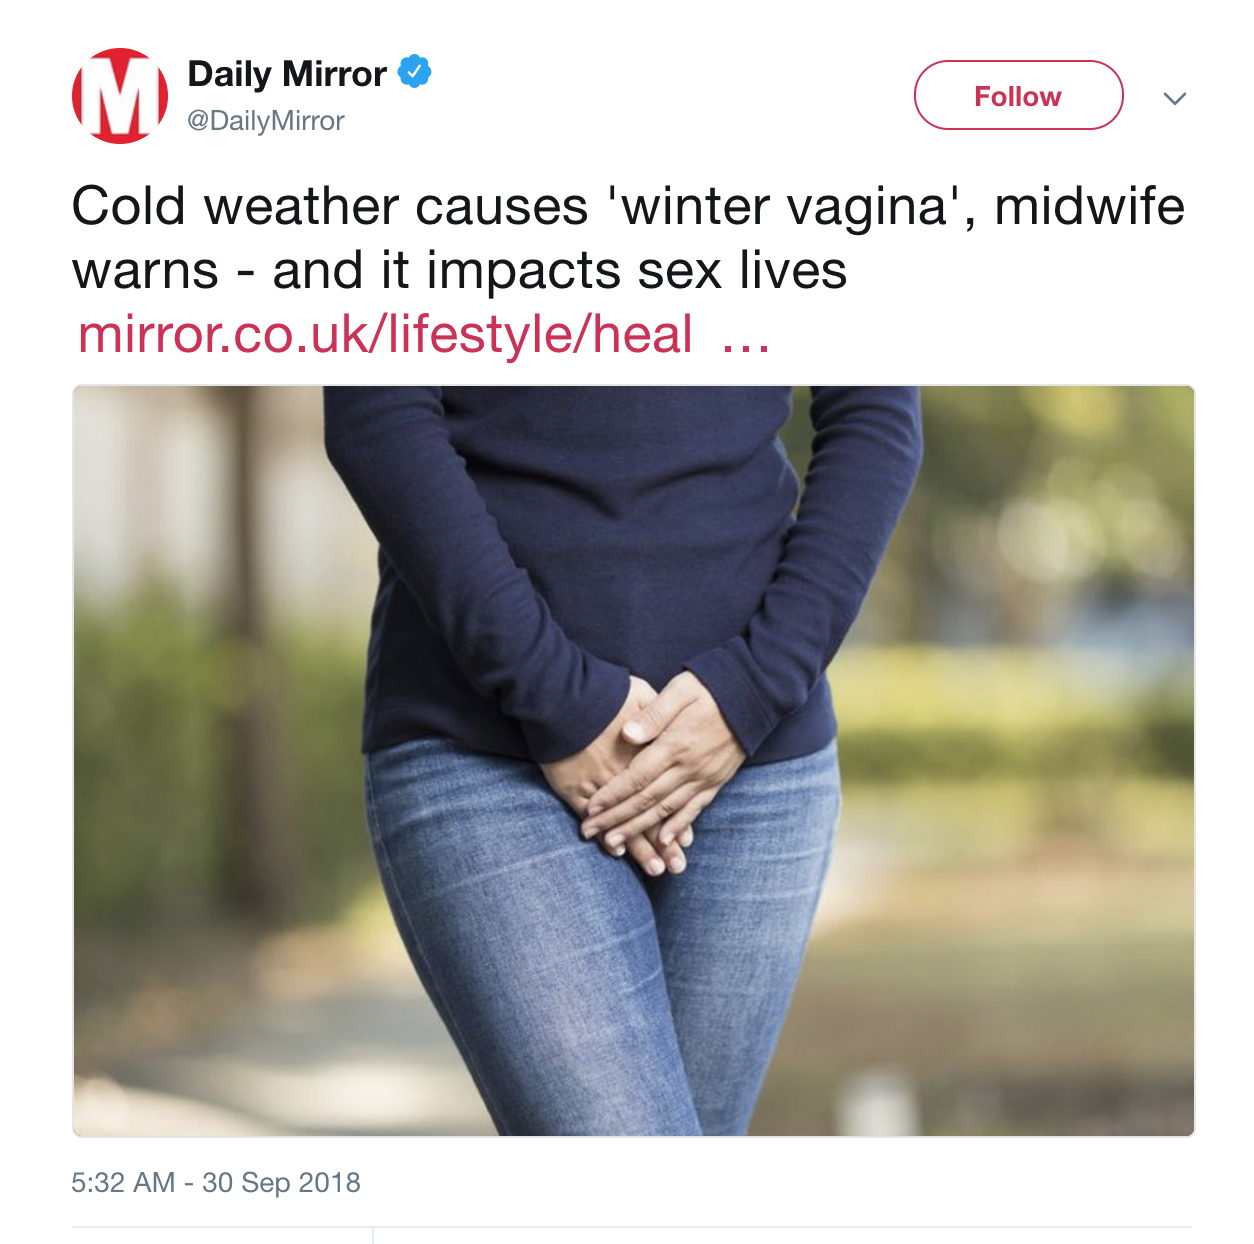 Daily Mirror tweet claiming that "winter vagina" is a thing, and how to deal with it.